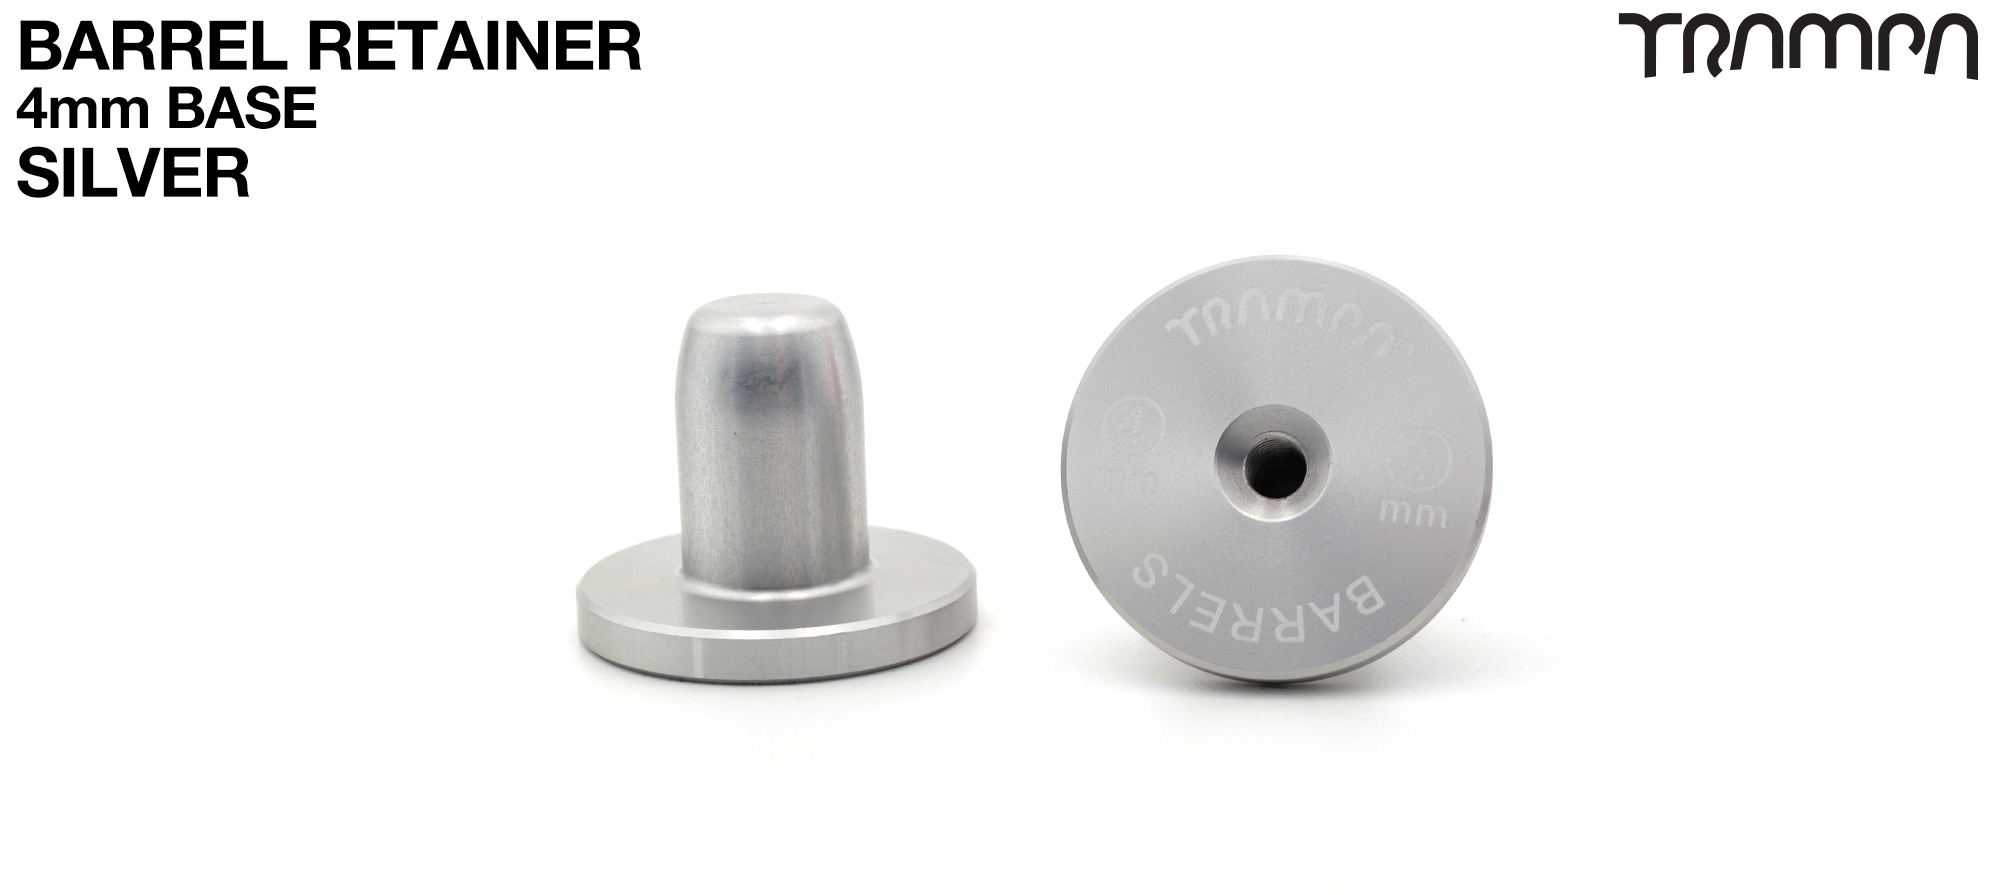 SILVER 4mm Barrel Retainers 